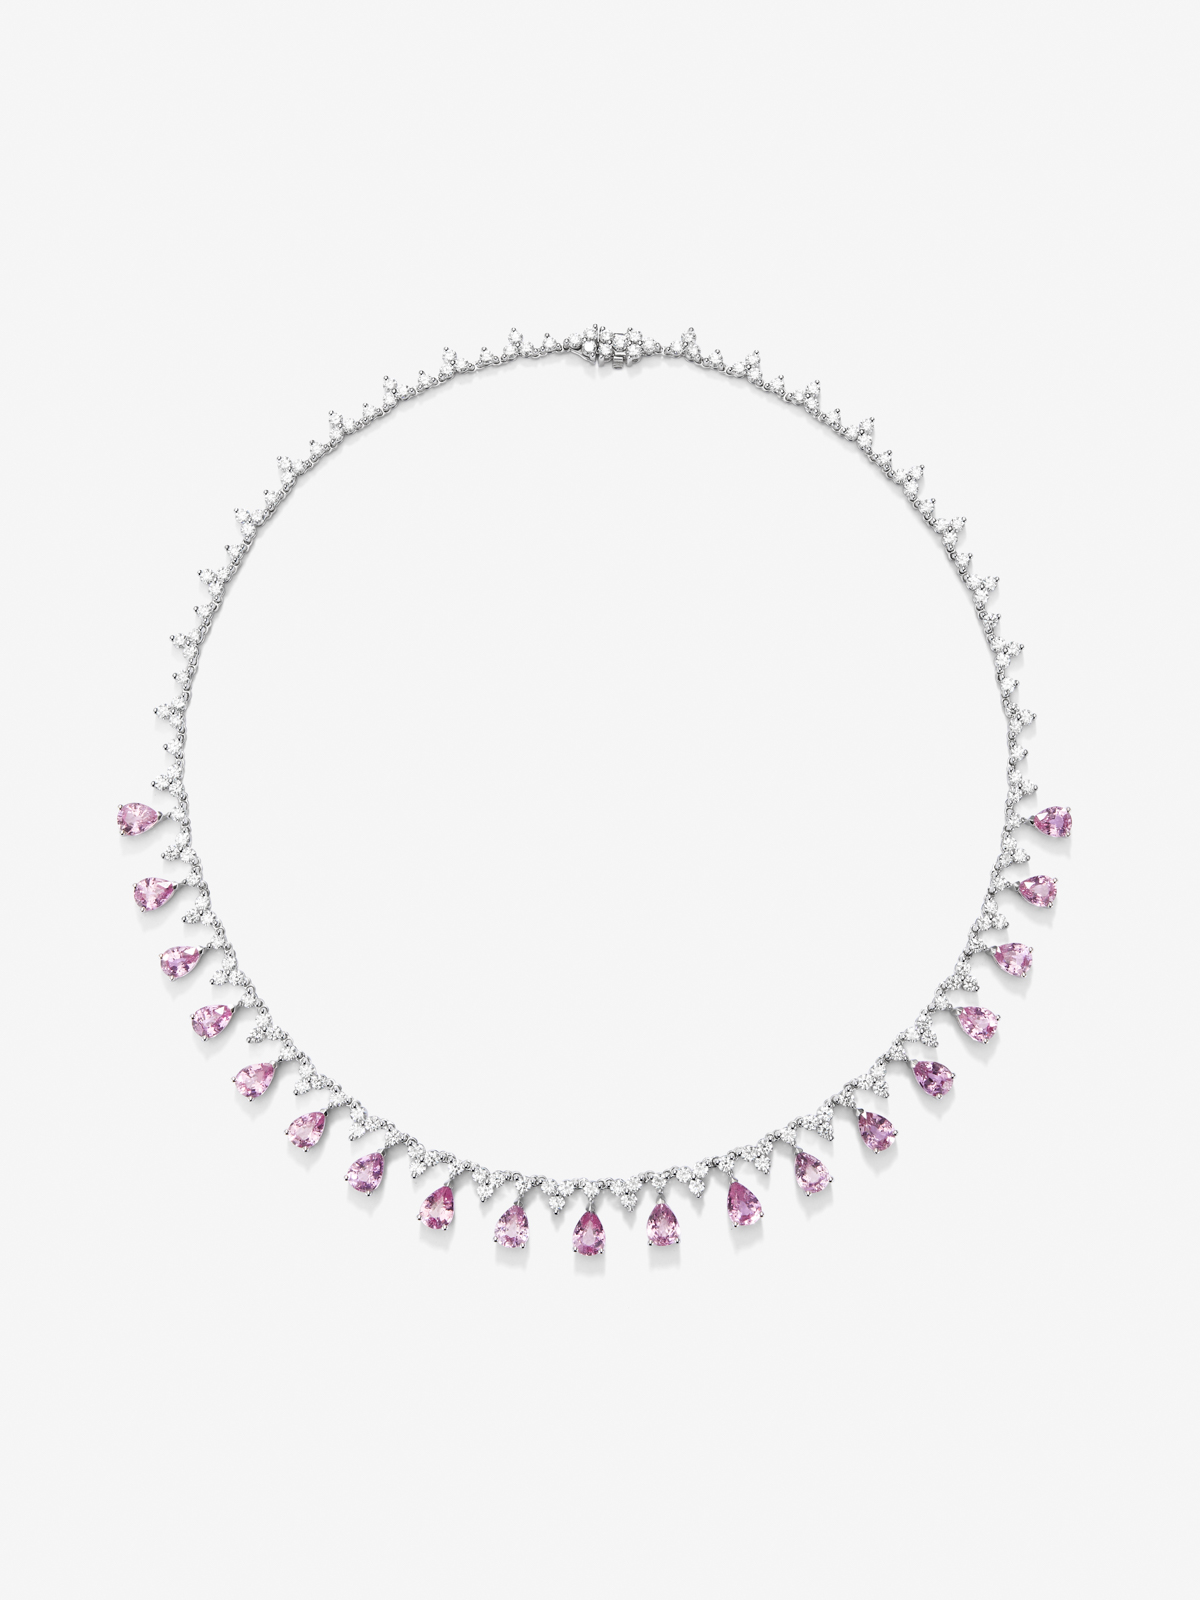 18K White Gold Rivière Collar with pink savings in 16.03 cts and white diamonds in 8.85 cts round diamonds